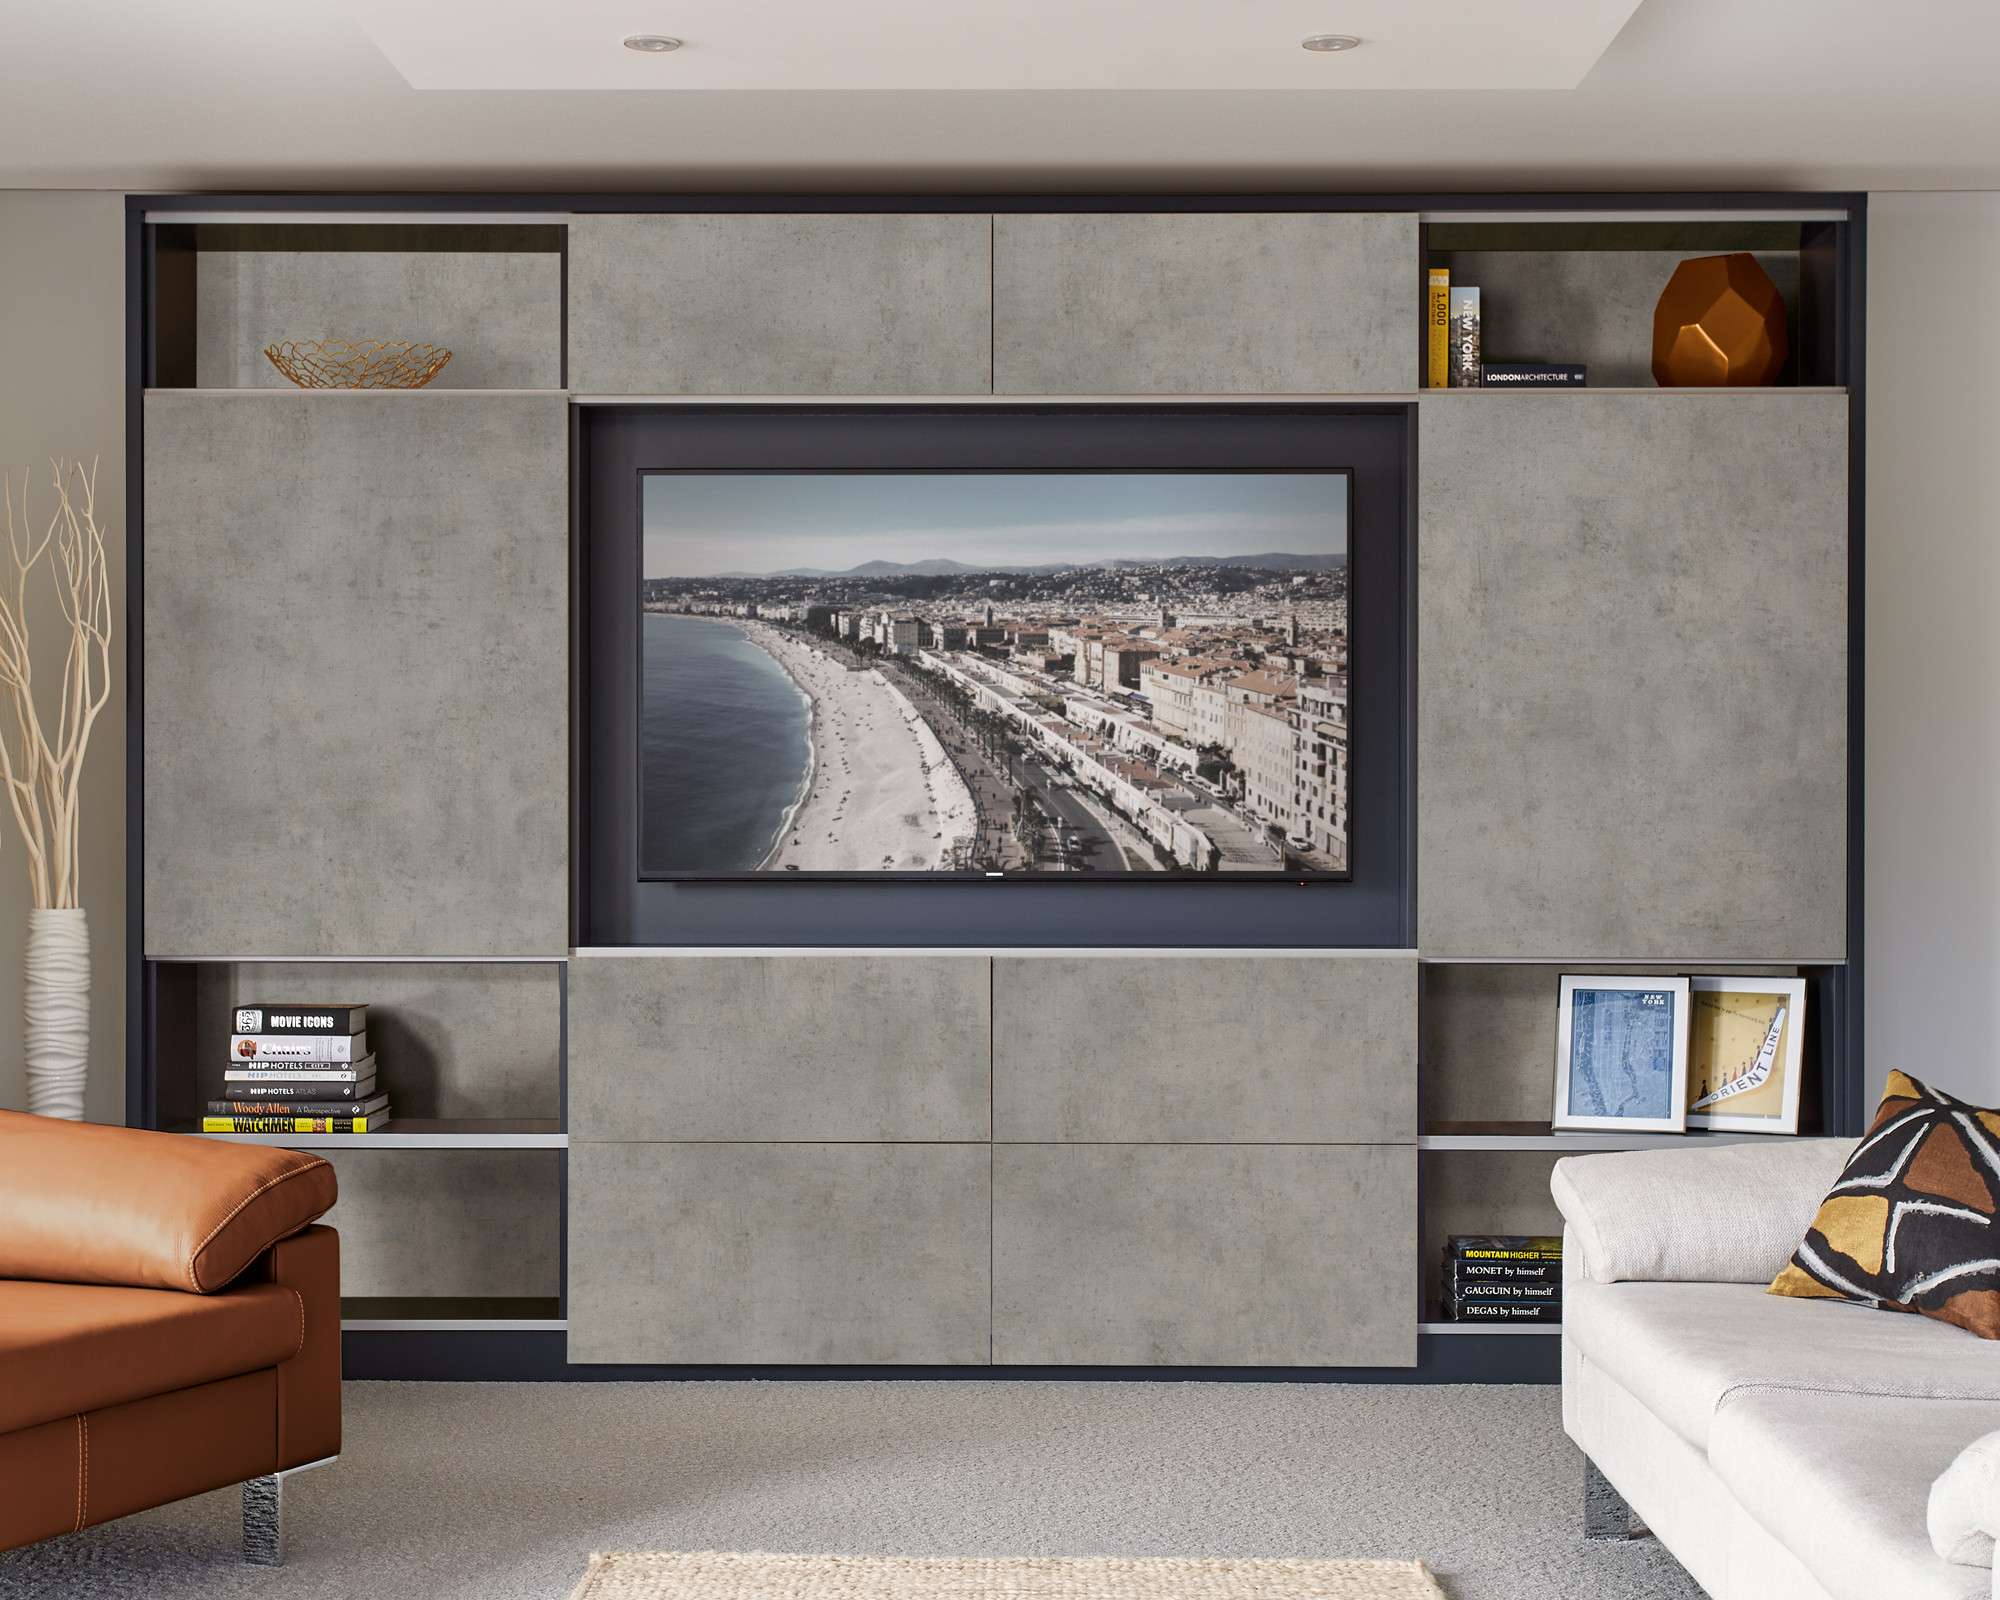 Built-in TV Units  Get the Perfect Fit for Your Space